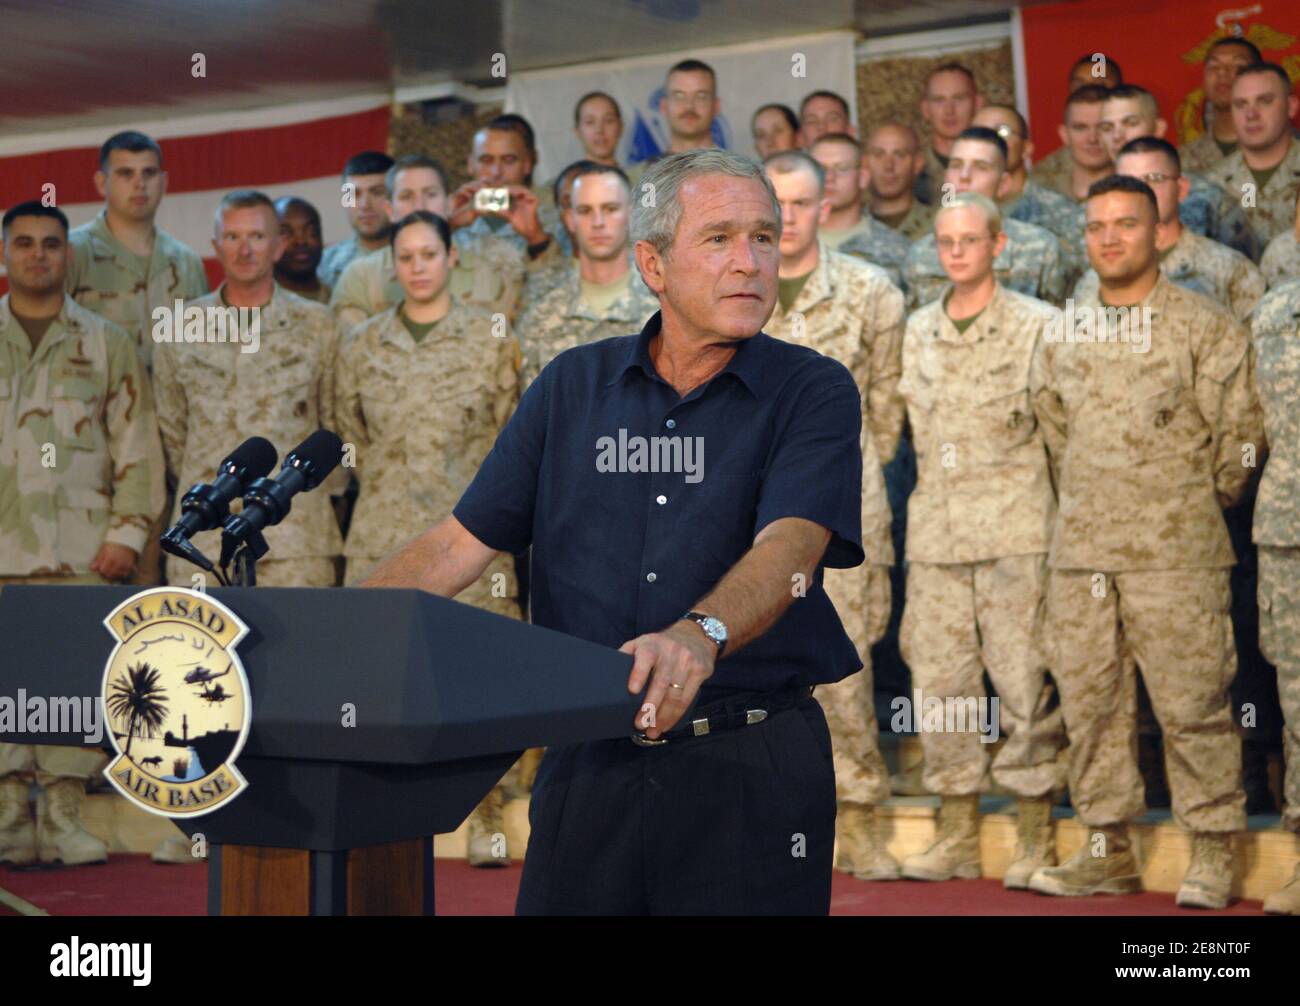 US President George W. Bush delivers his speech to service members during his surprise visit to Al Asad Air Base, Iraq on September 3, 2007. Bush rejected intensifying pressure from the Democratic-led Congress to start pulling troops immediately out of the unpopular war in Iraq. 'Those decisions will be based on a calm assessment by our military commanders on the conditions on the ground, not a nervous reaction by Washington politicians to poll results in the media,' the president said. Photo by DOD via ABACAPRESS.COM Stock Photo